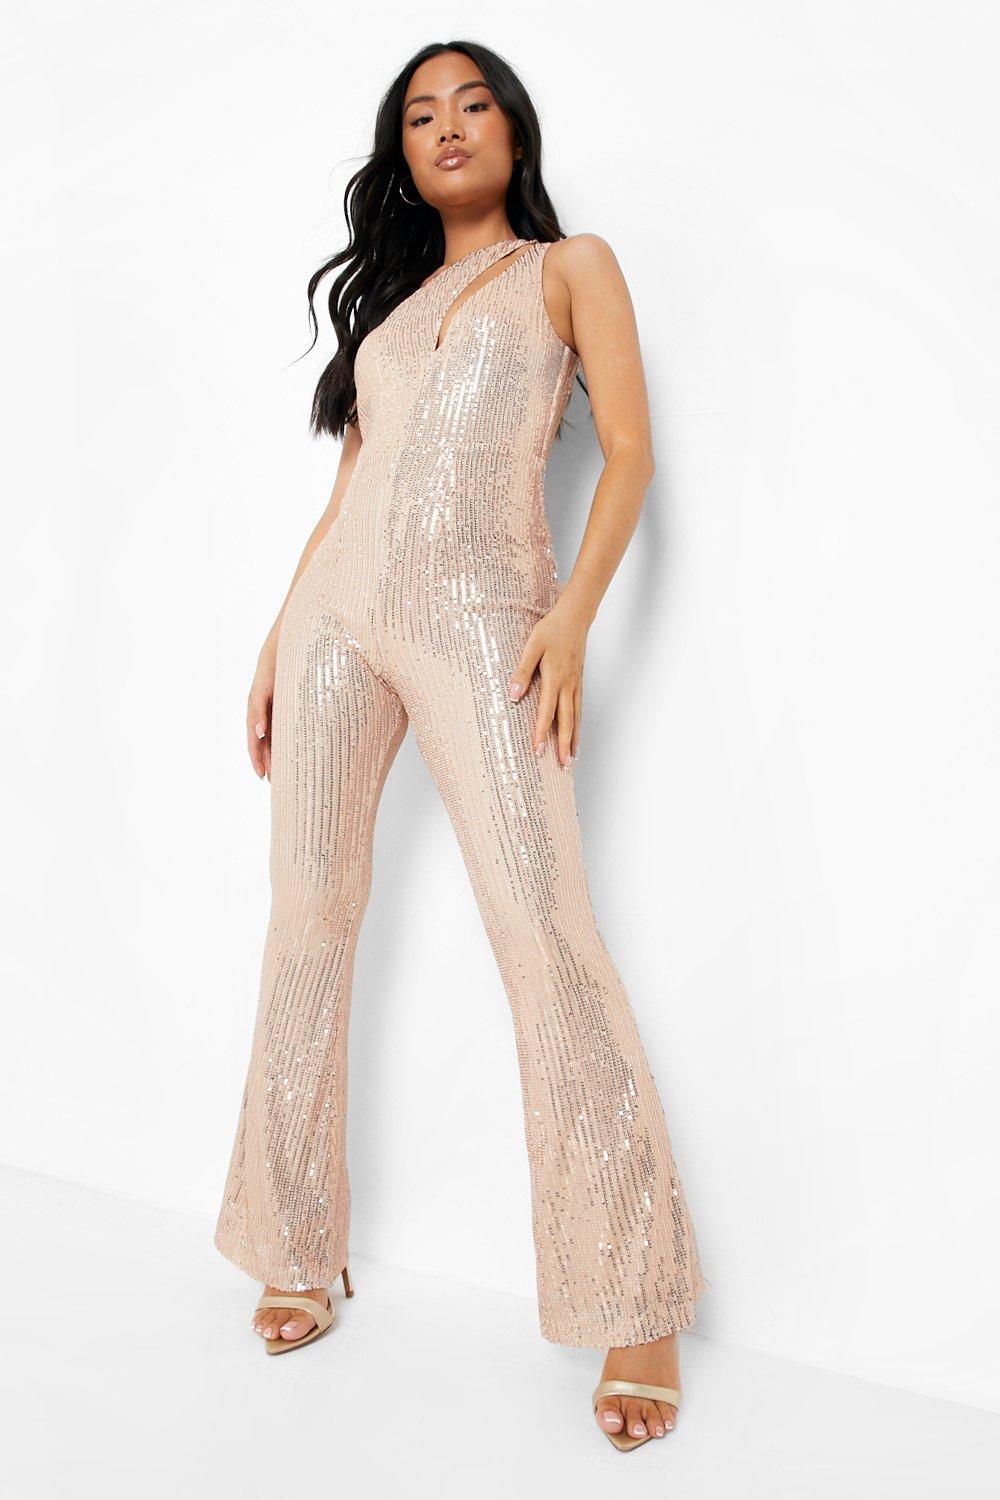 70s Outfits – 70s Style Ideas for Women Womens Petite Sequin Cut Out Detail Flare Jumpsuit - Gold - 12 $32.00 AT vintagedancer.com